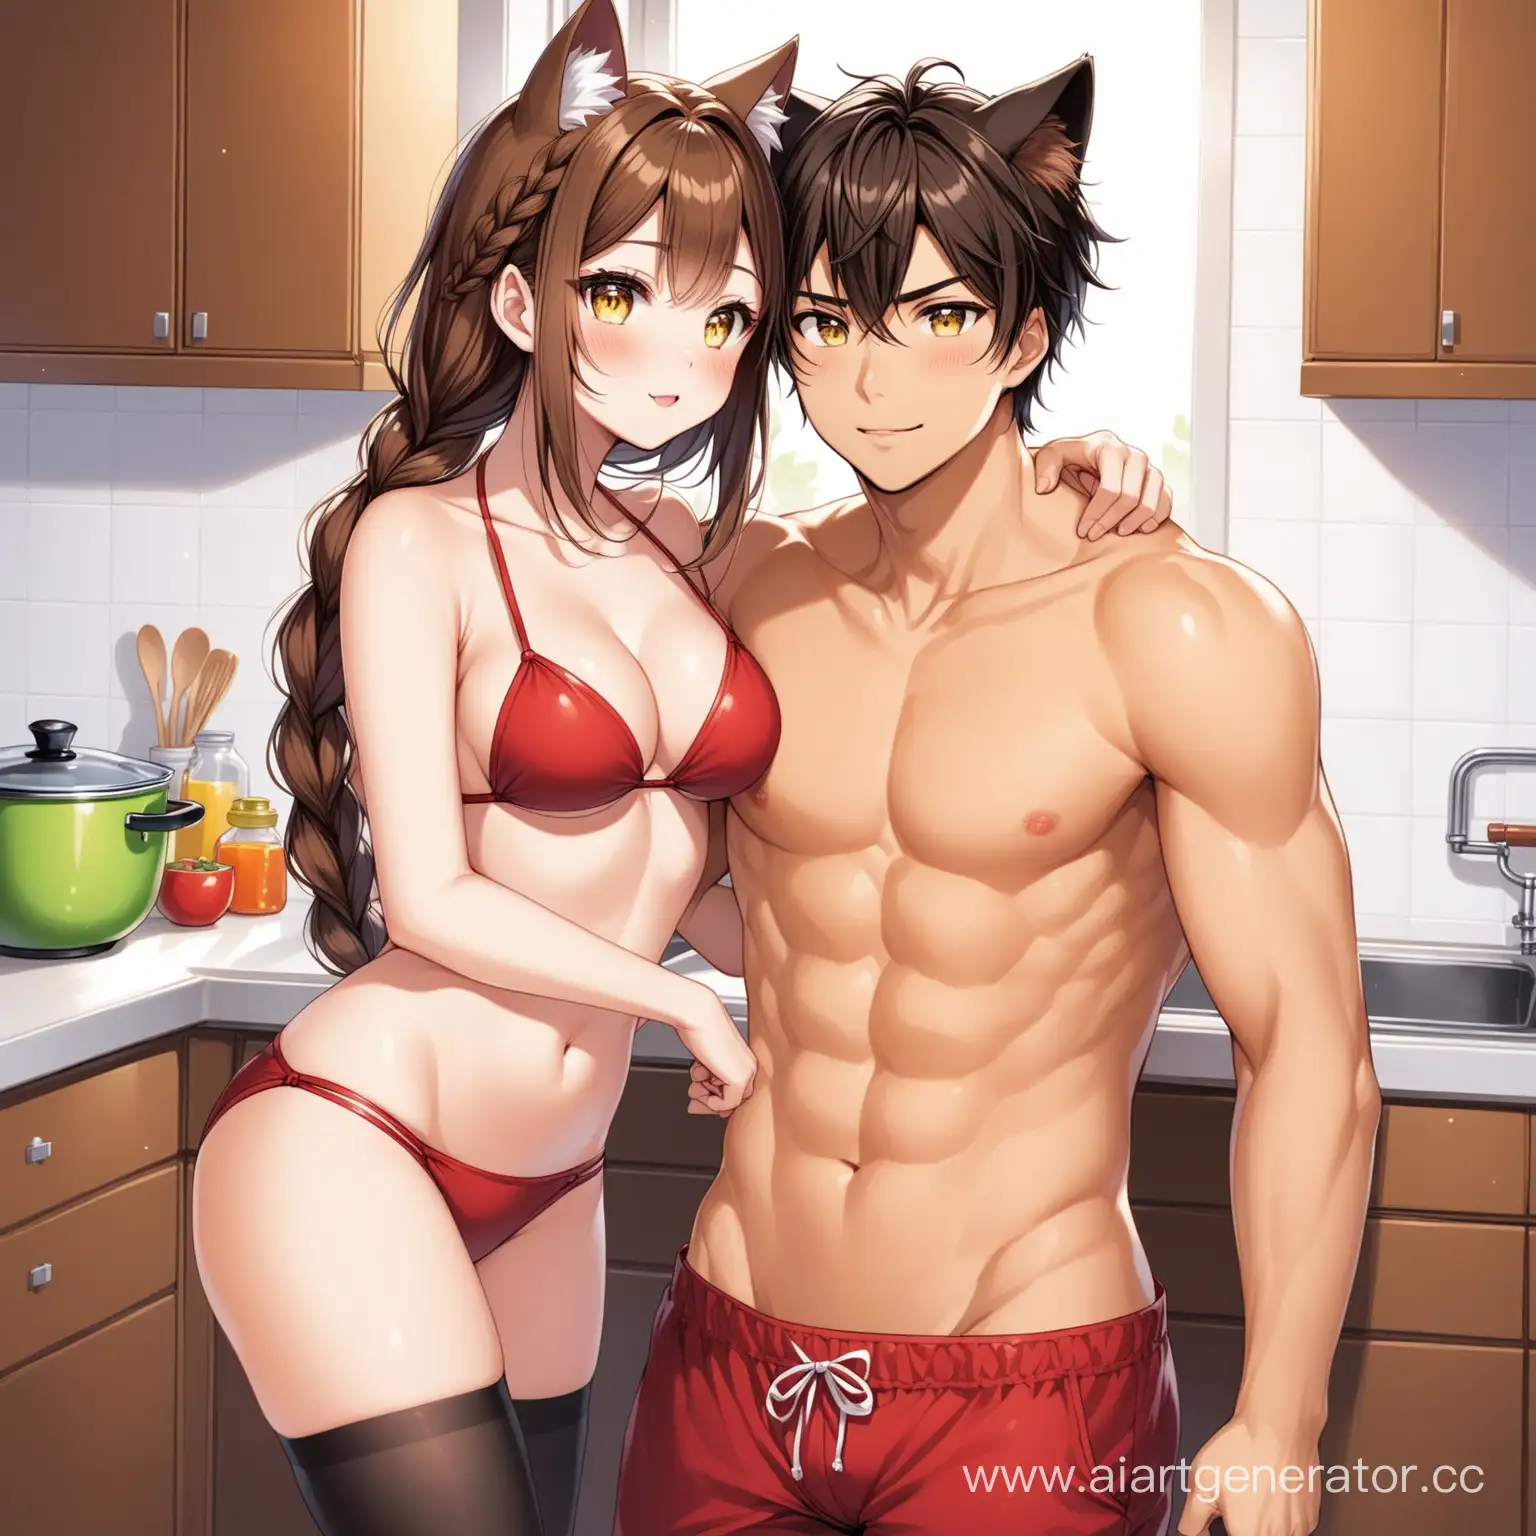 BrownHaired-Catgirl-and-Boyfriend-Cooking-Together-in-Kitchen